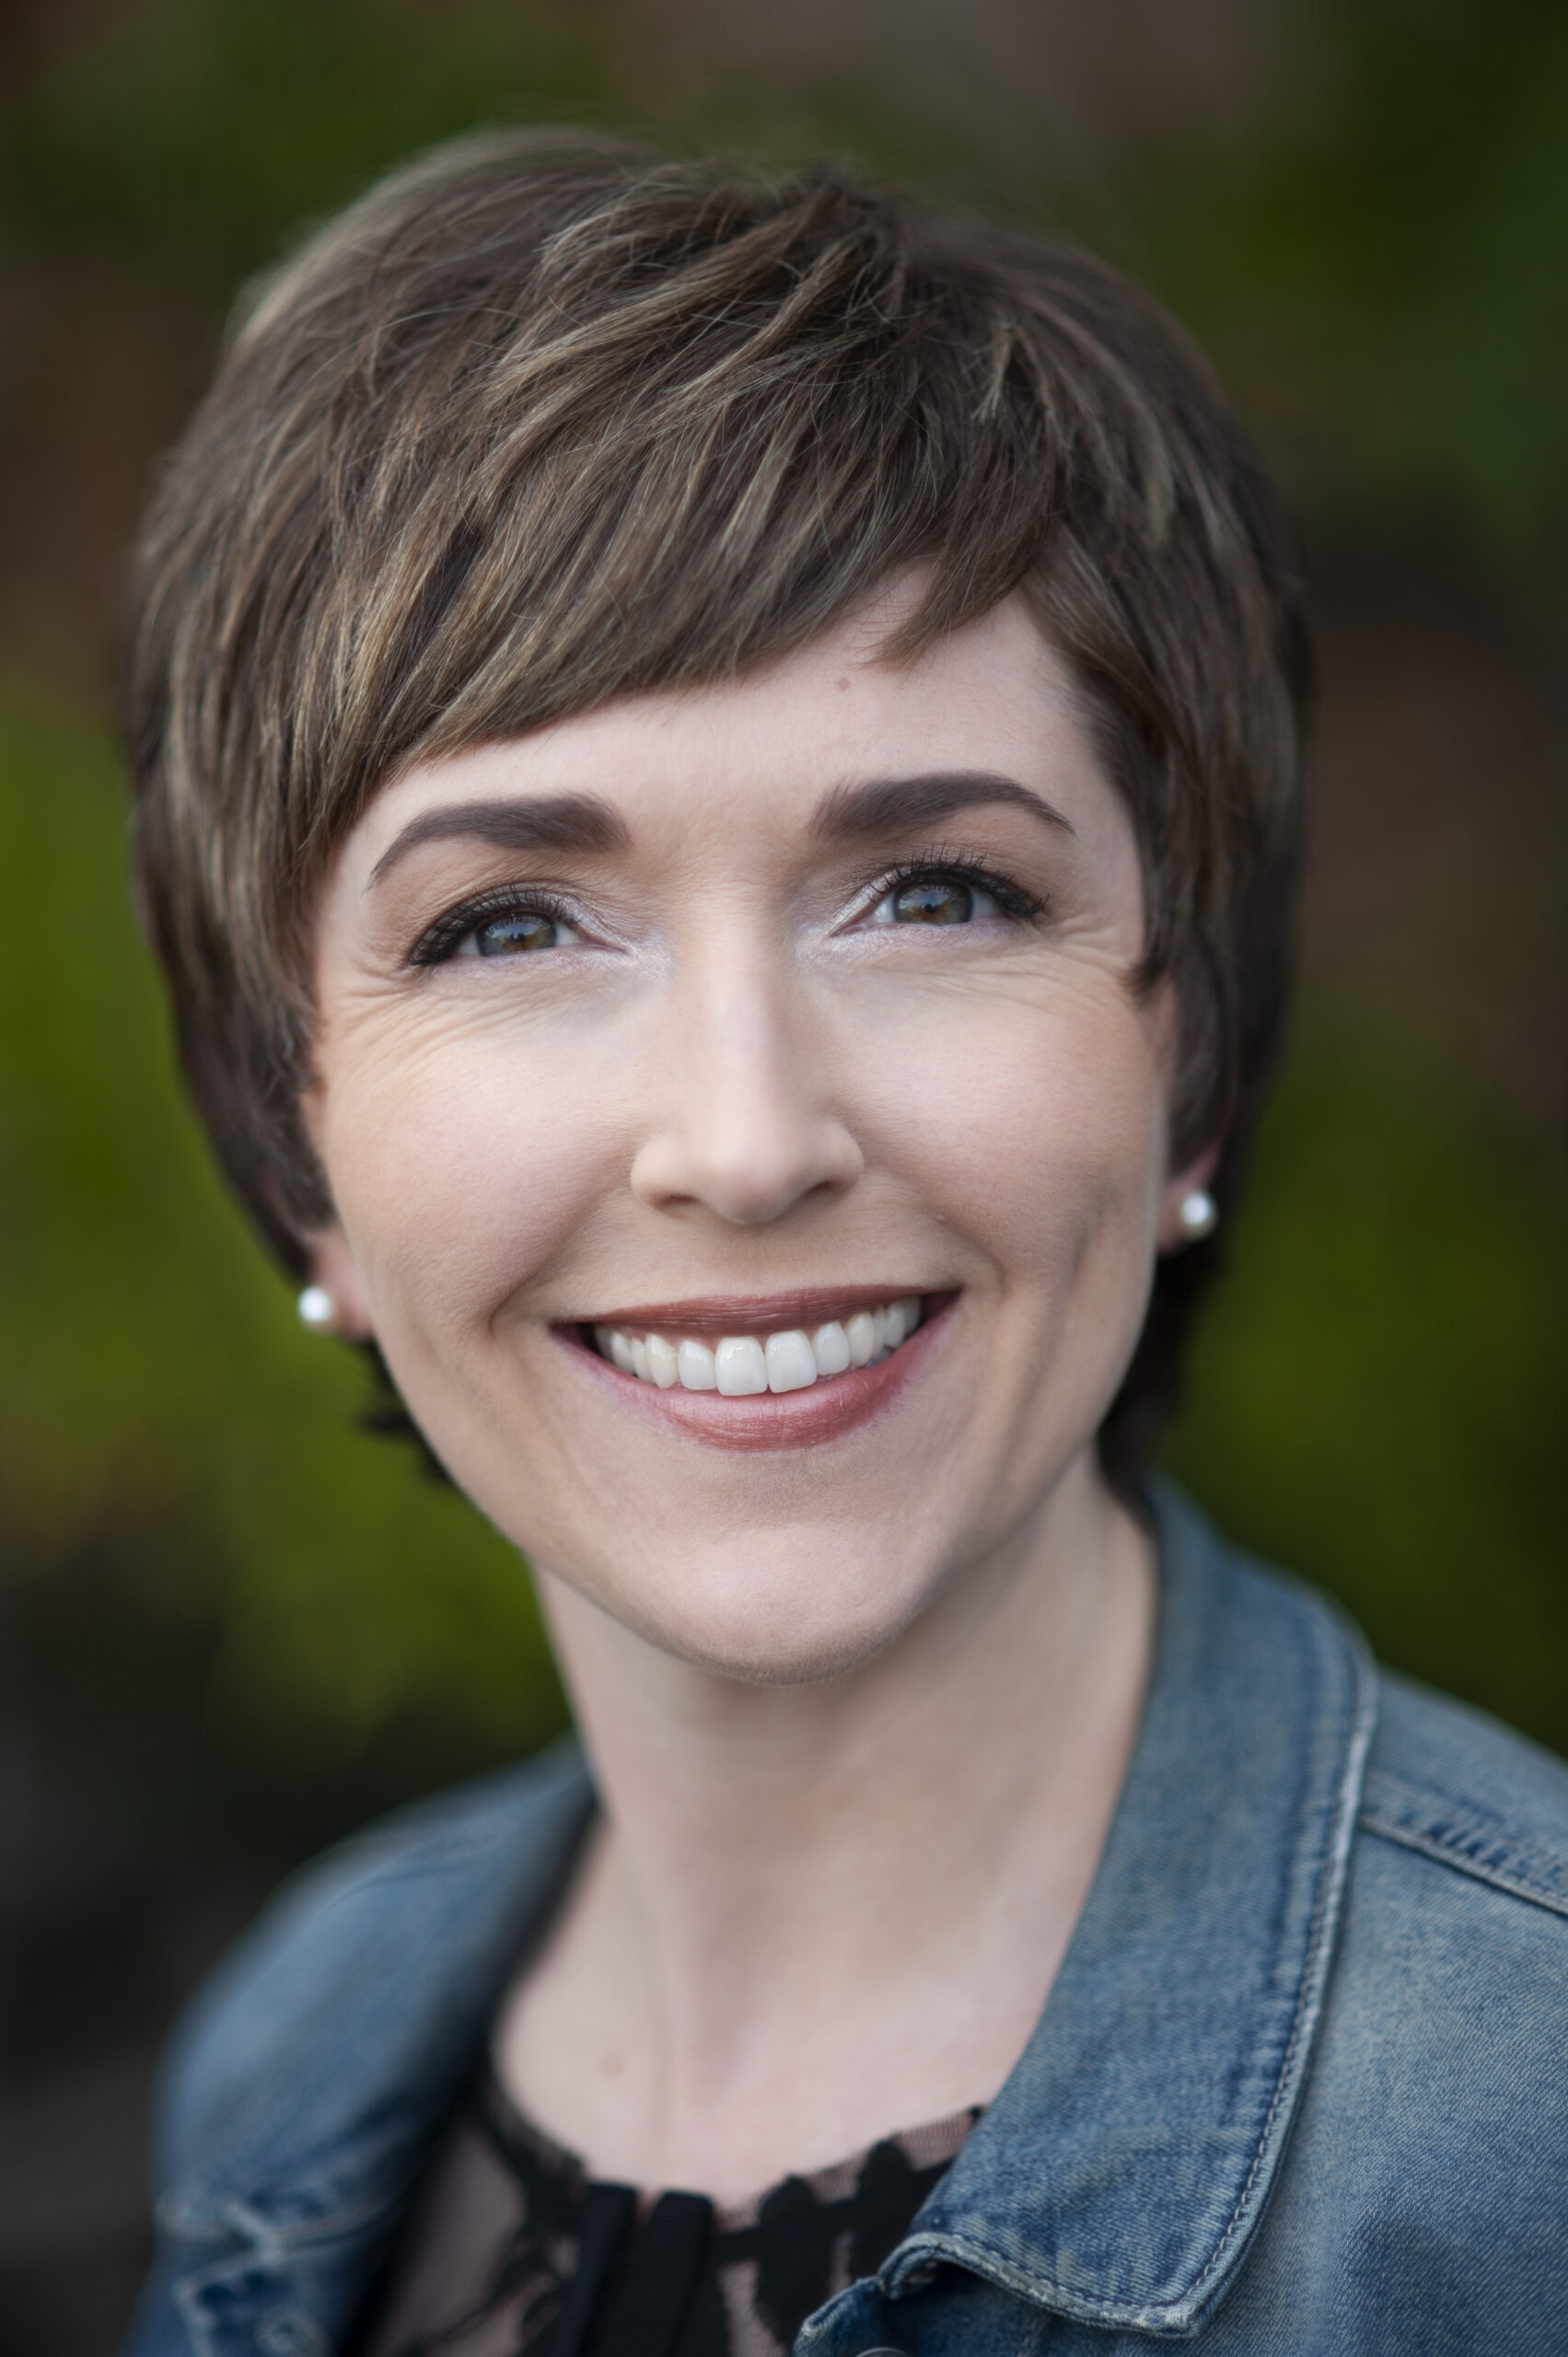 Head shot of the website owner showing her with short hair in a denim jacket